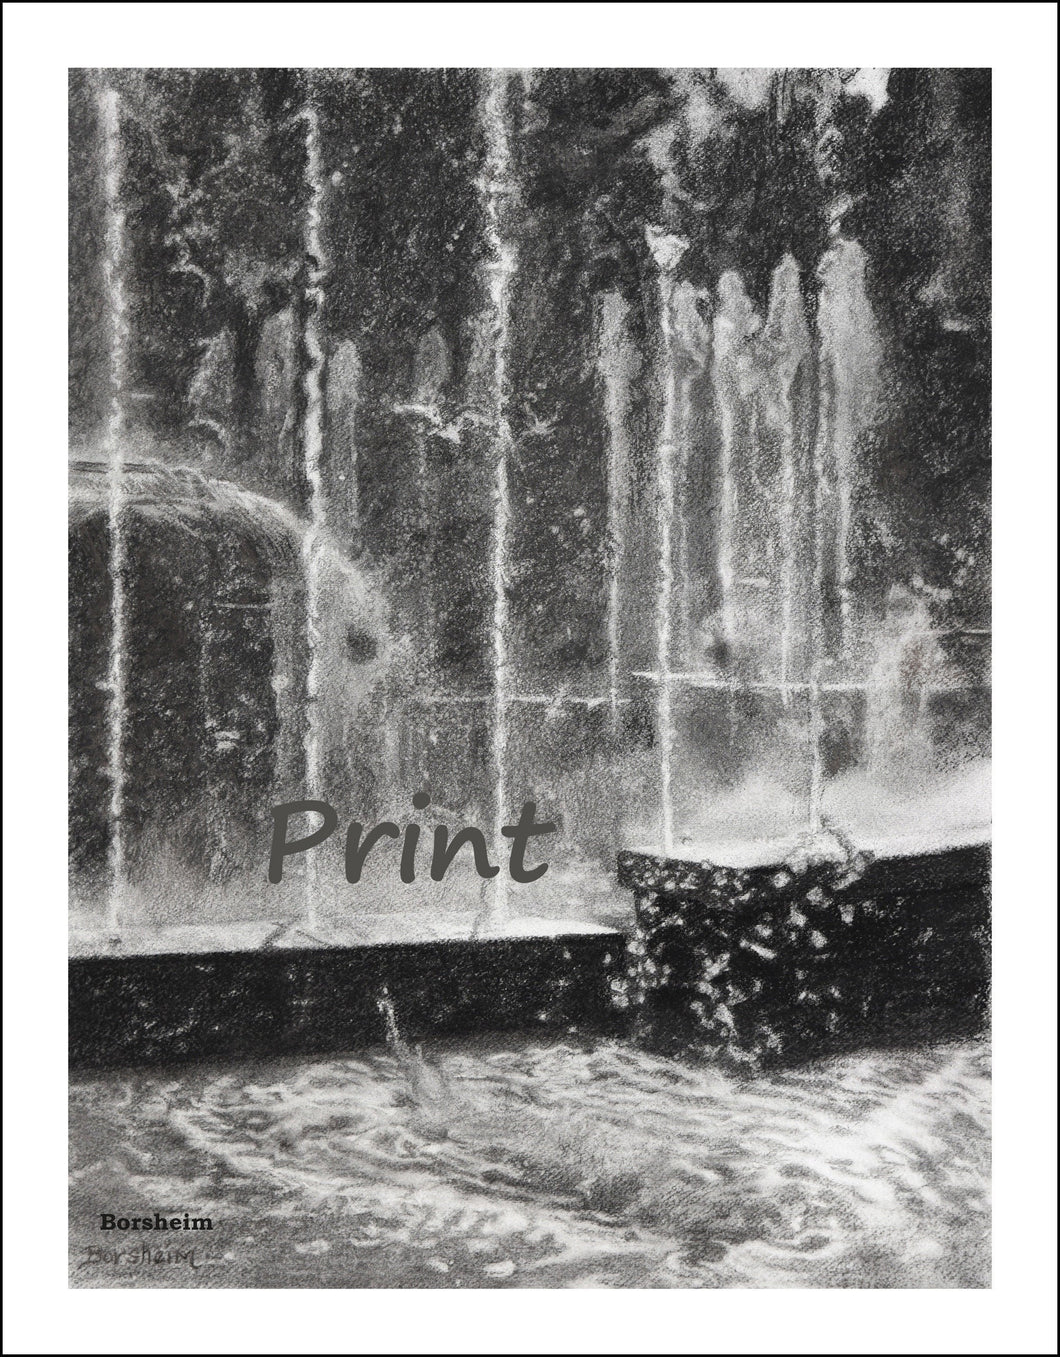 Effervescence Water Fountain in Milan Italy Spraying Water Bubbler Travel Summer City Scene Black and White - PRINT Fine Art Reproduction